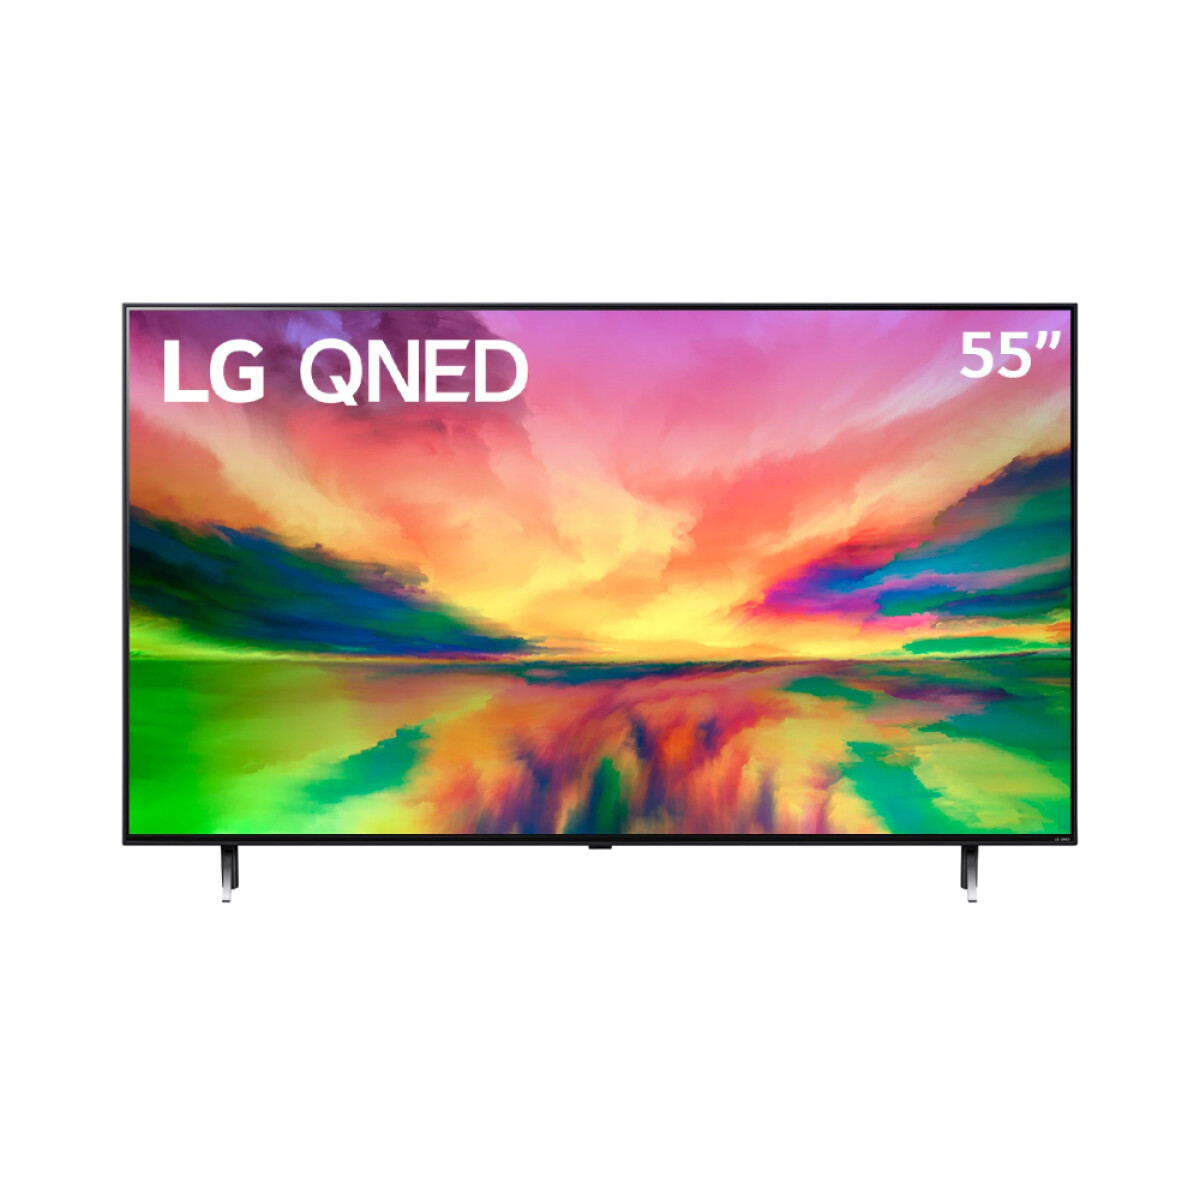 Smart TV LG QNED 4K 55" 55QNED80 